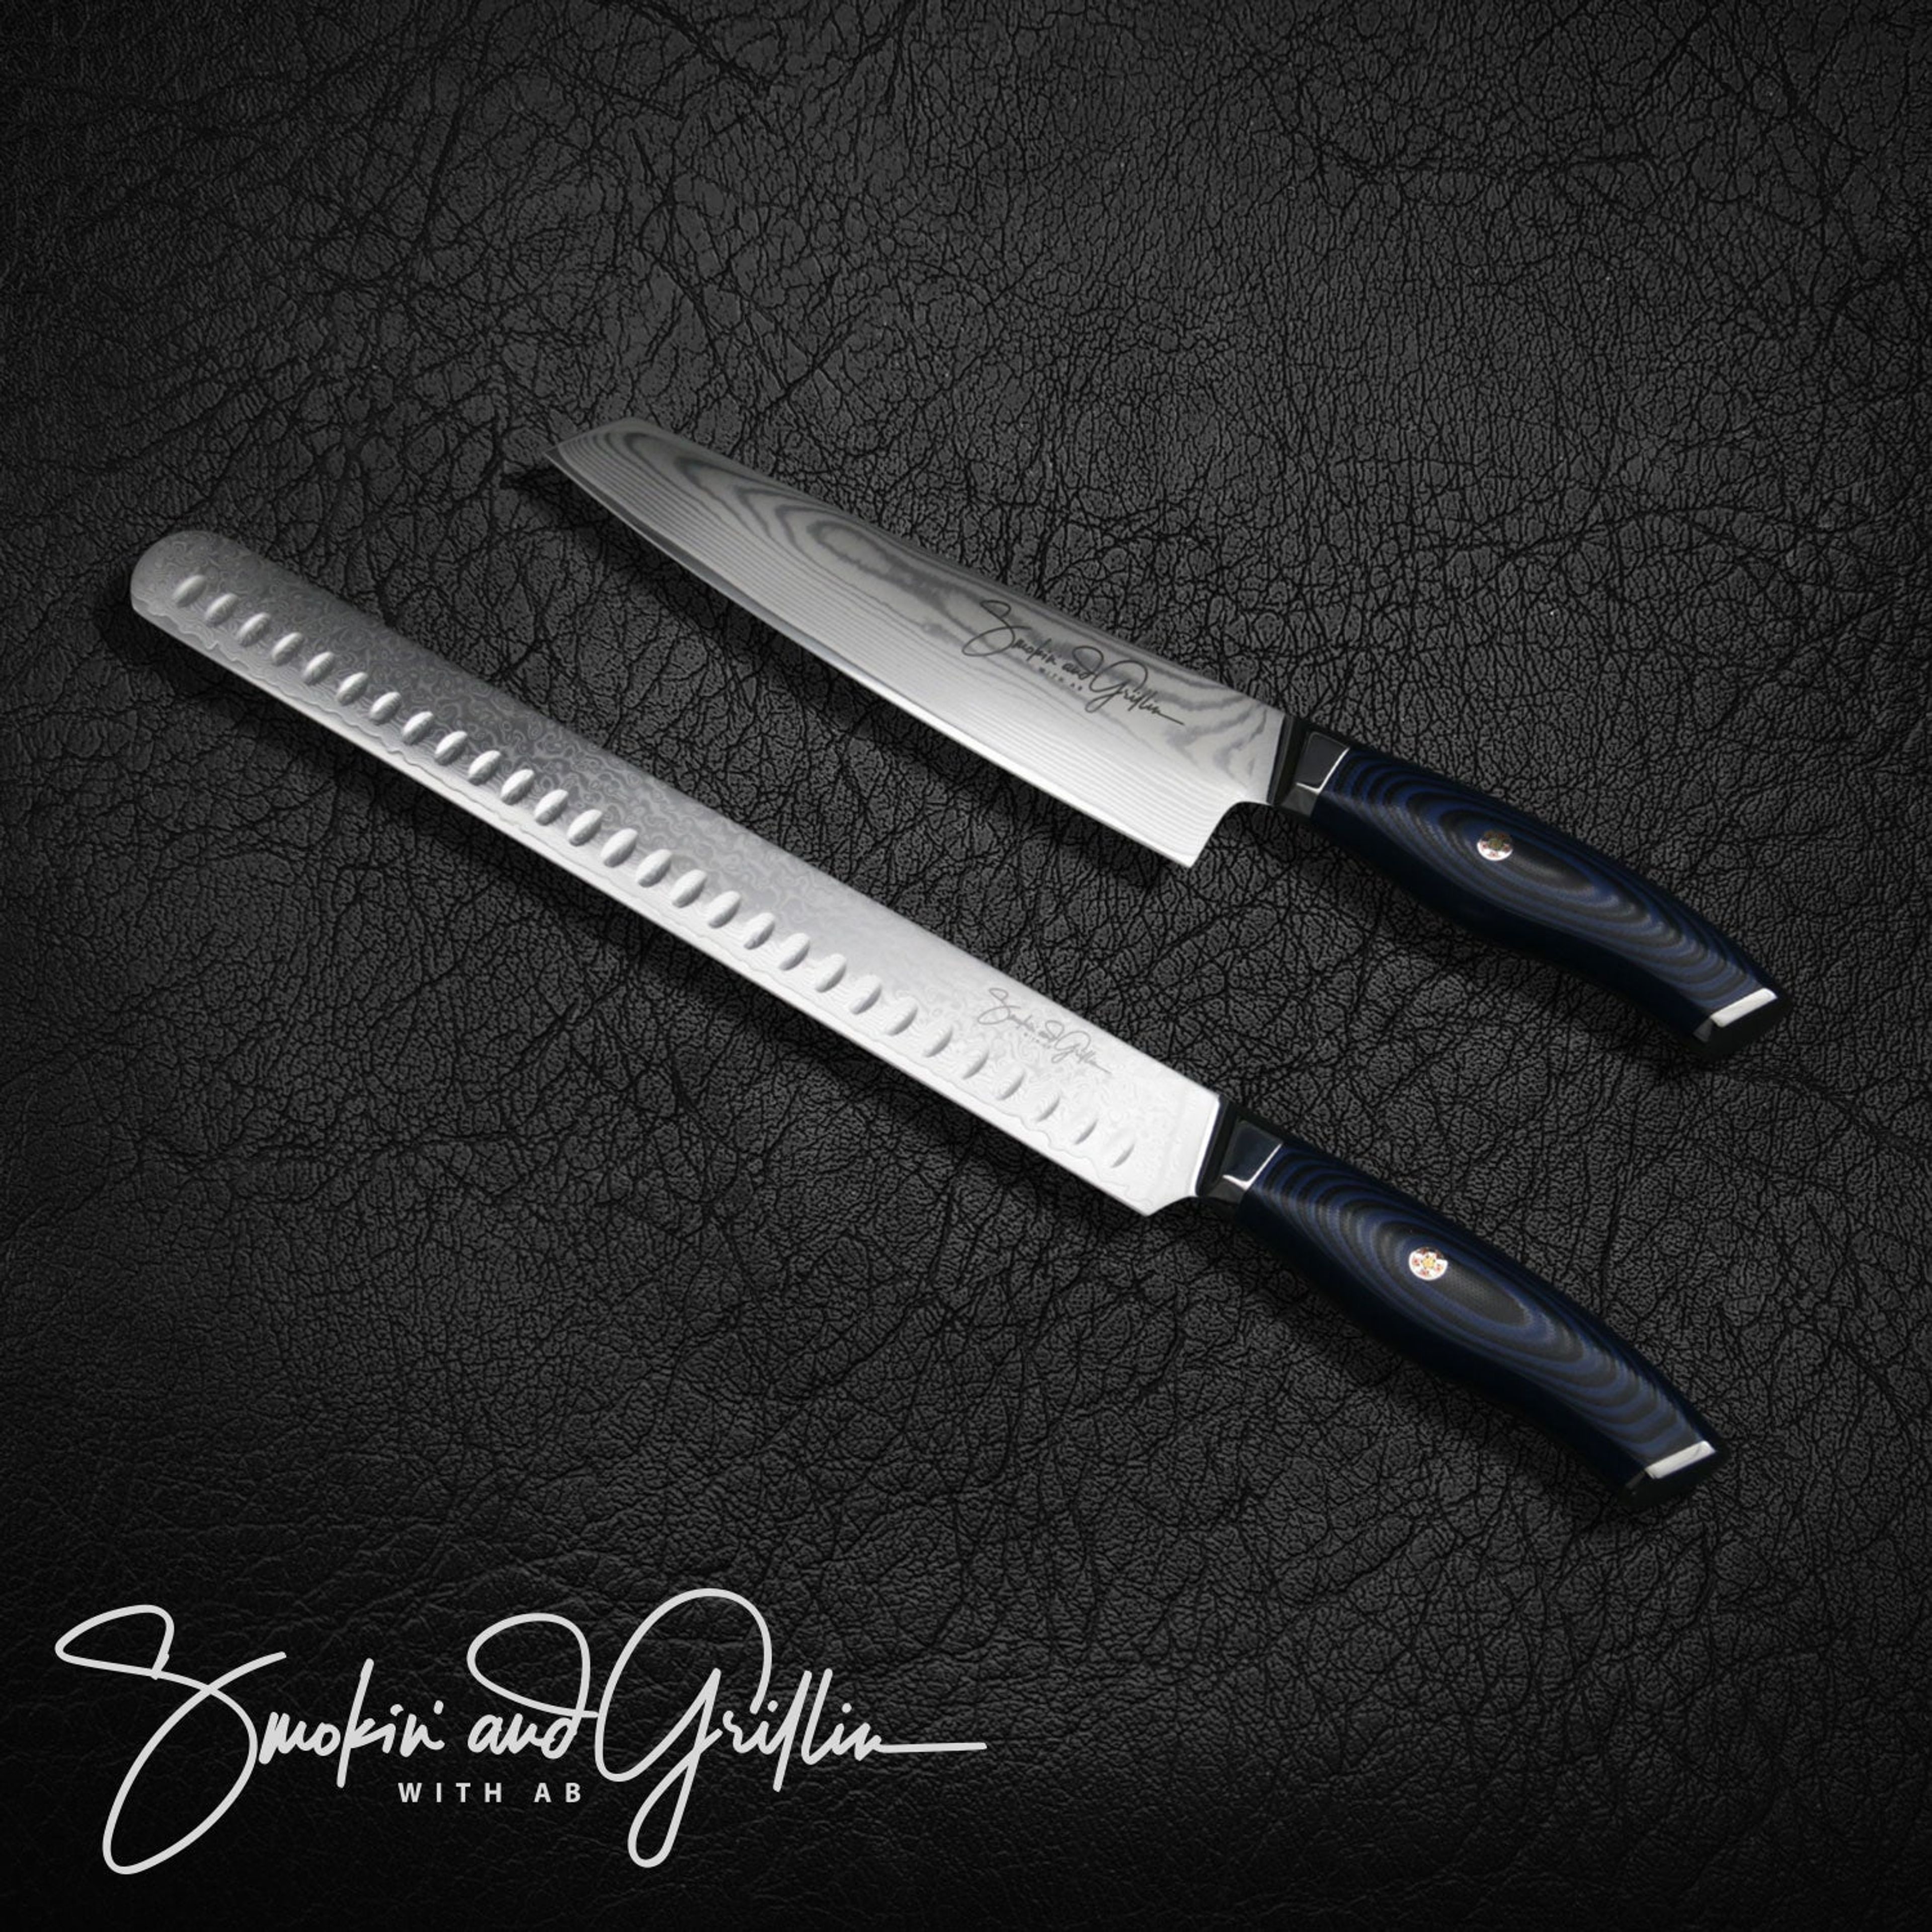 Smokin' and Grillin' with AB Signature Japanese Damascus Steel Knife set of 2